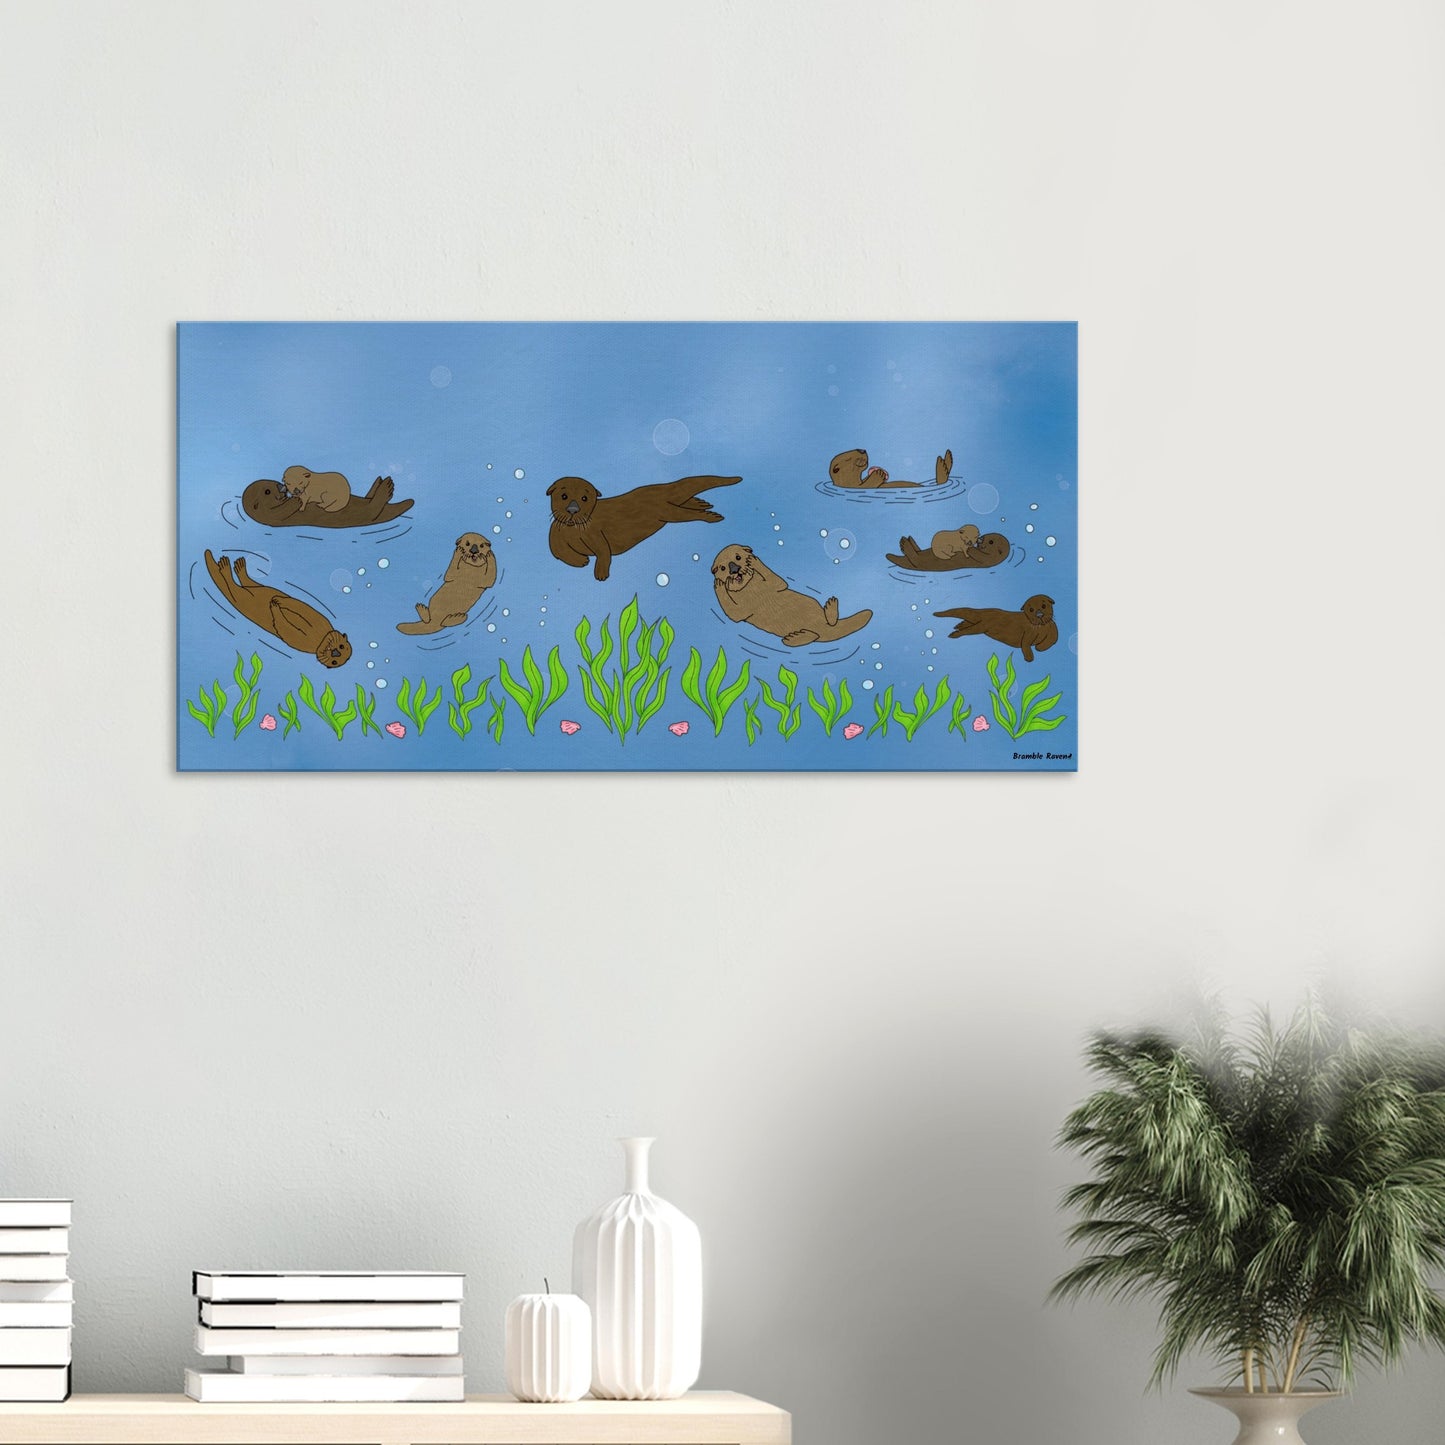 20 by 40 inch slim canvas wall art print of sea otters swimming along the seabed. Shown on wall above desktop with books and a potted plant.